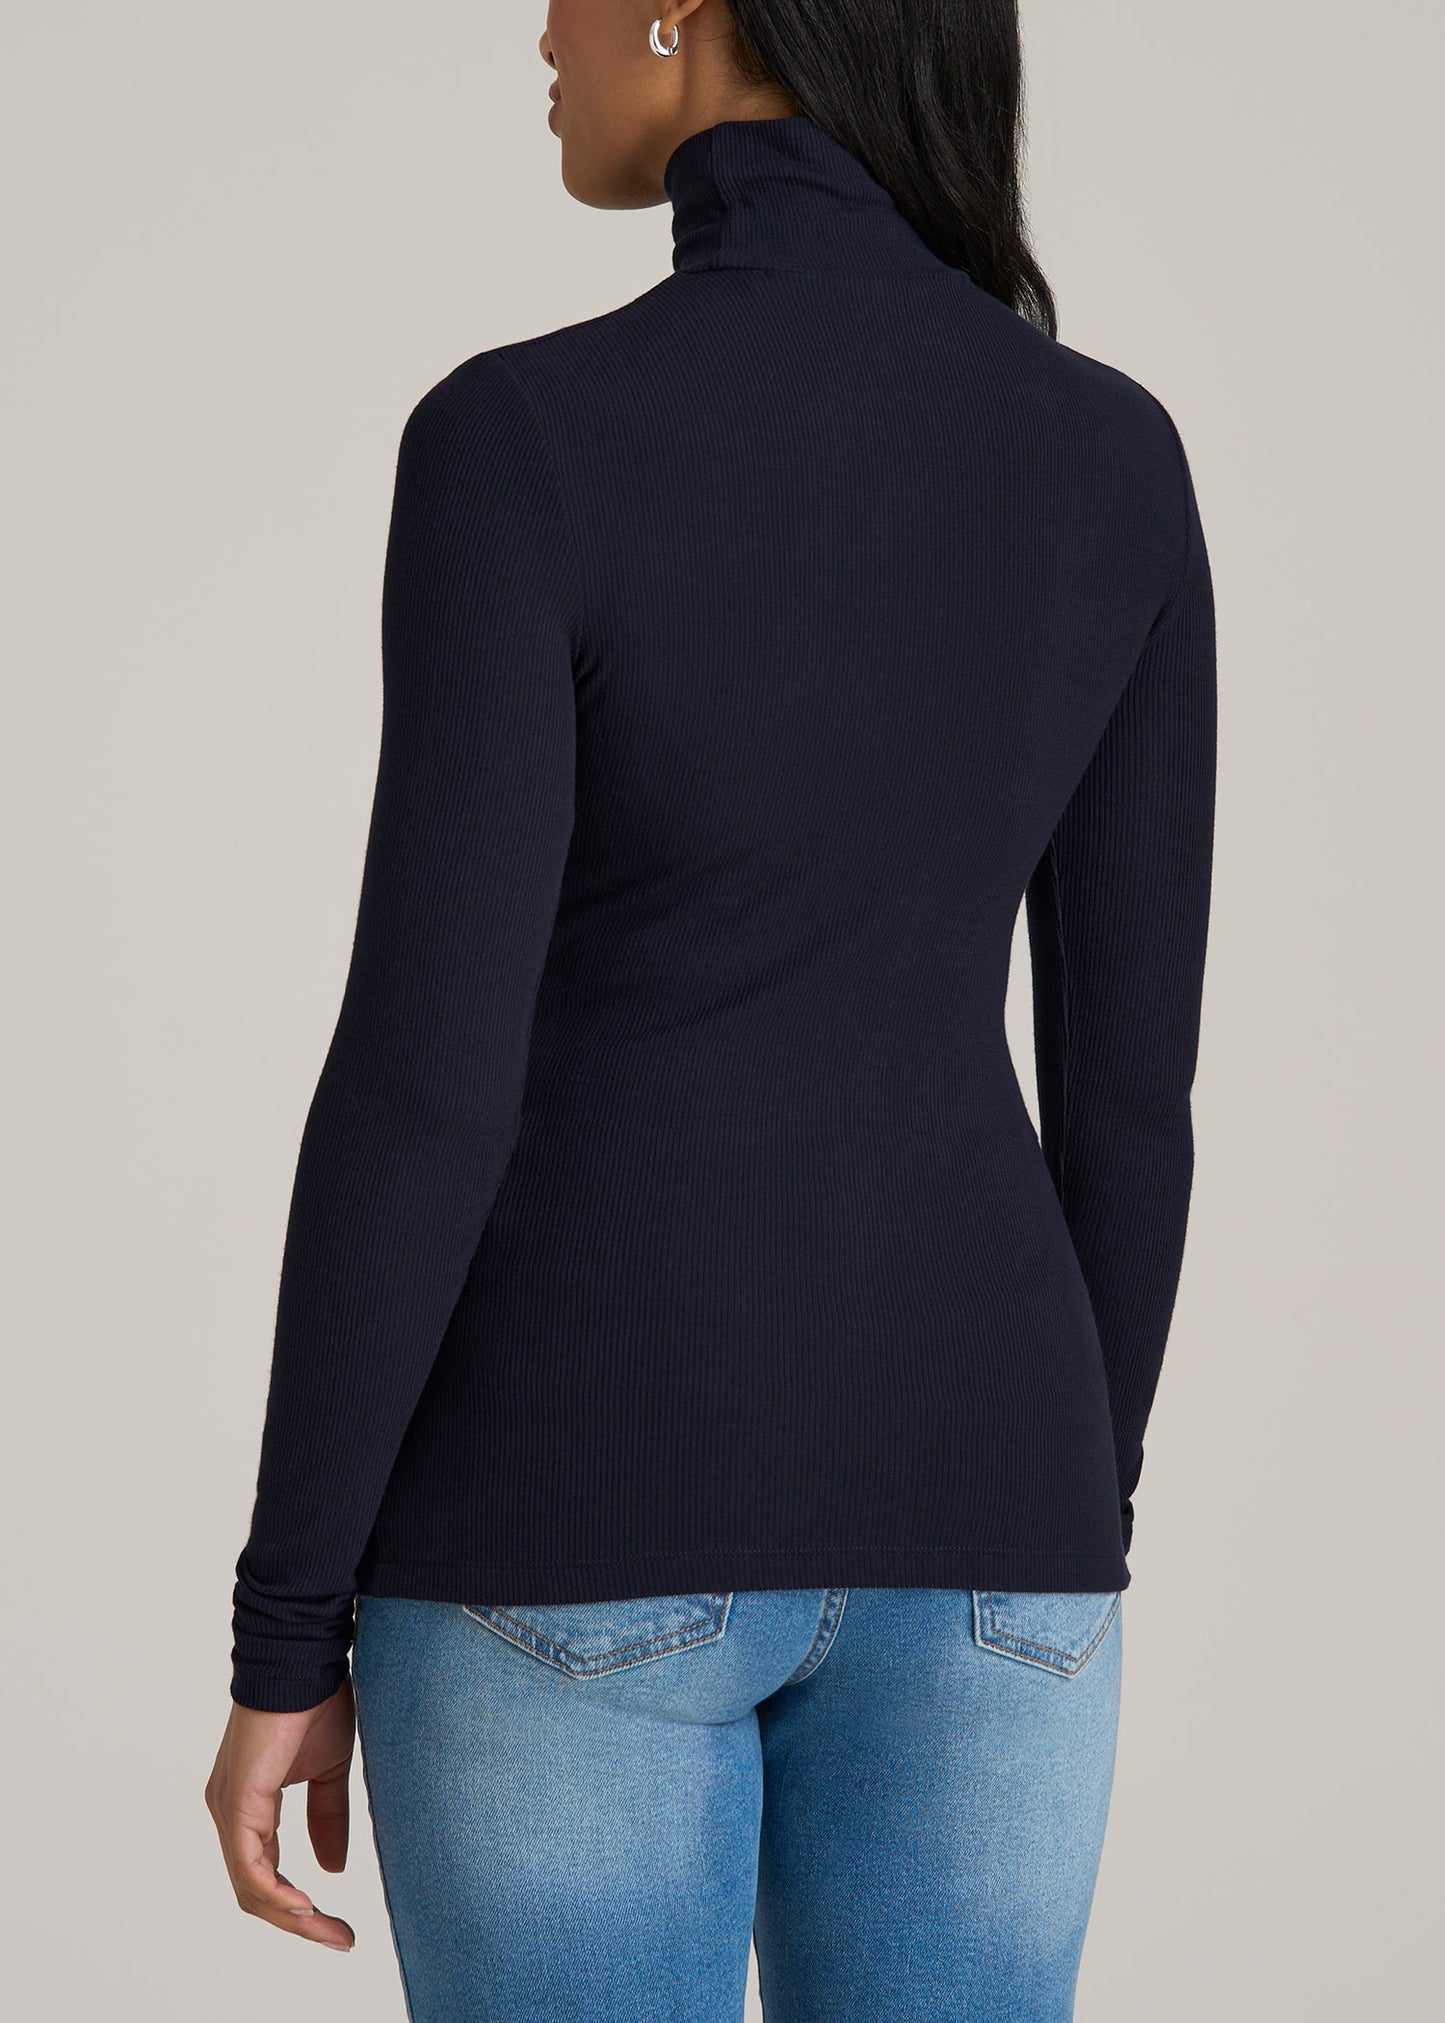 Tall Women's FITTED Long Sleeve Ribbed Turtleneck Tee in Deep Navy